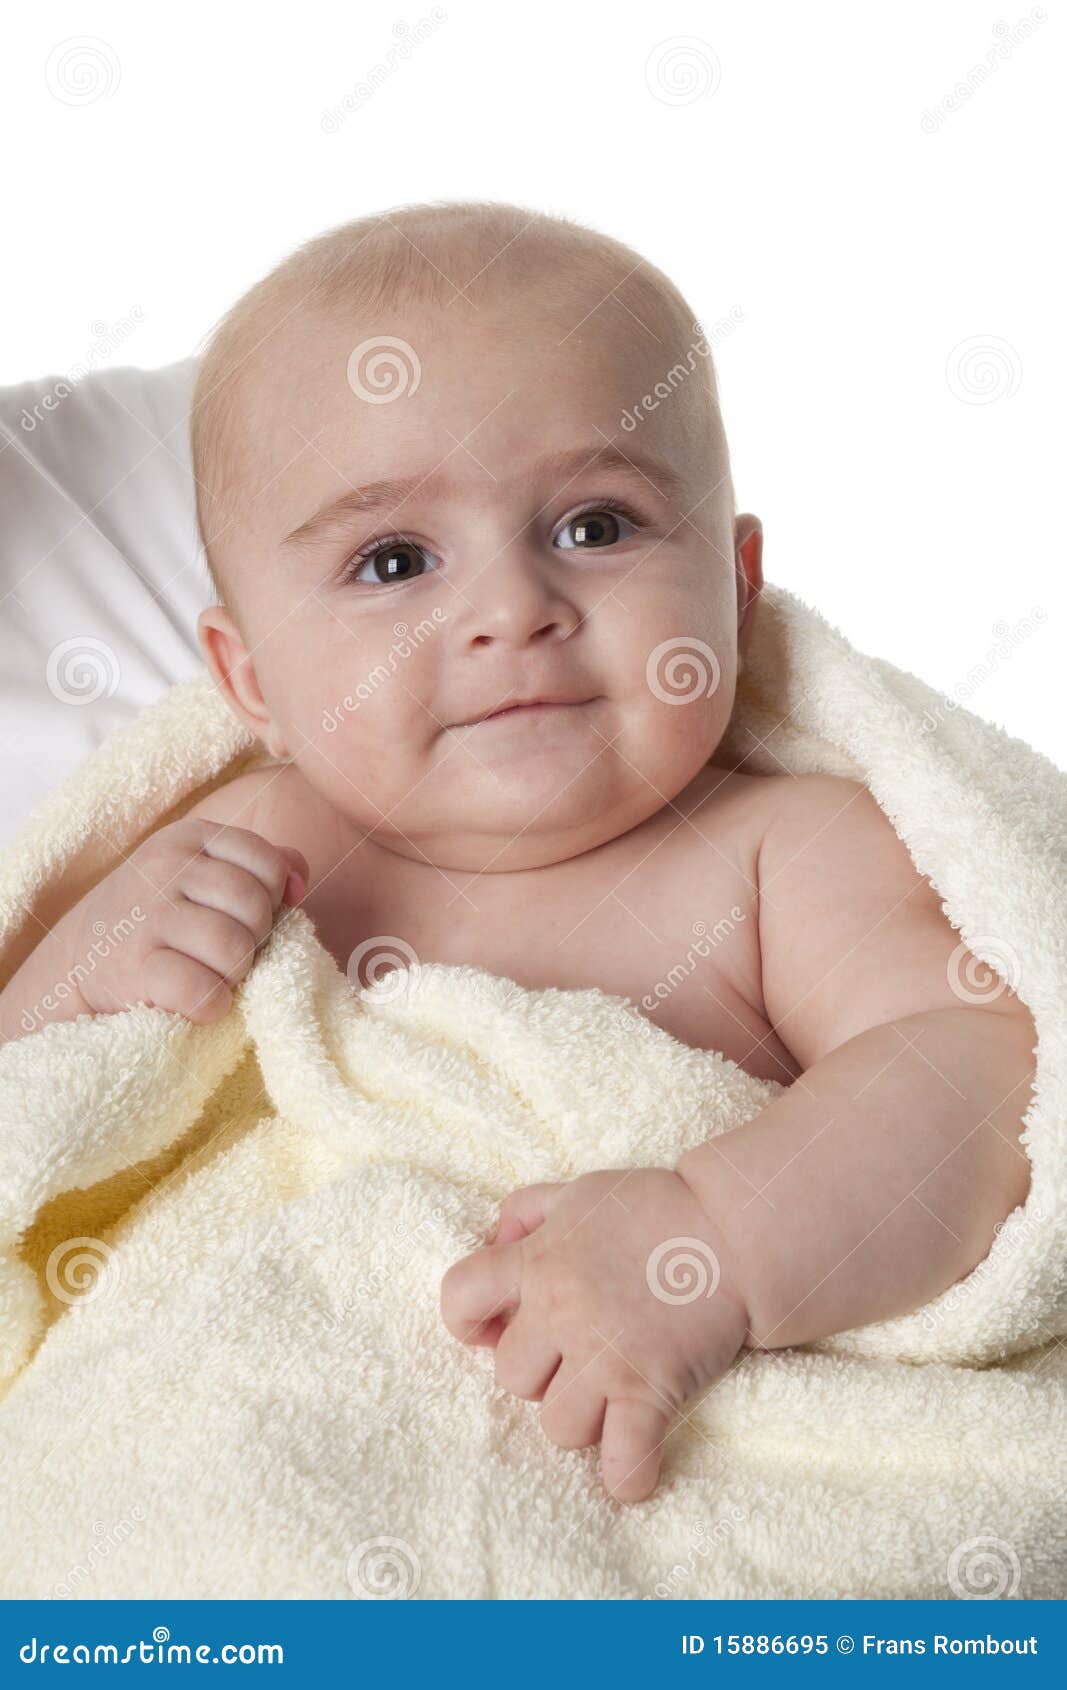 Happy Baby Boy Wrapped in a Towel Stock Image - Image of baby, child ...